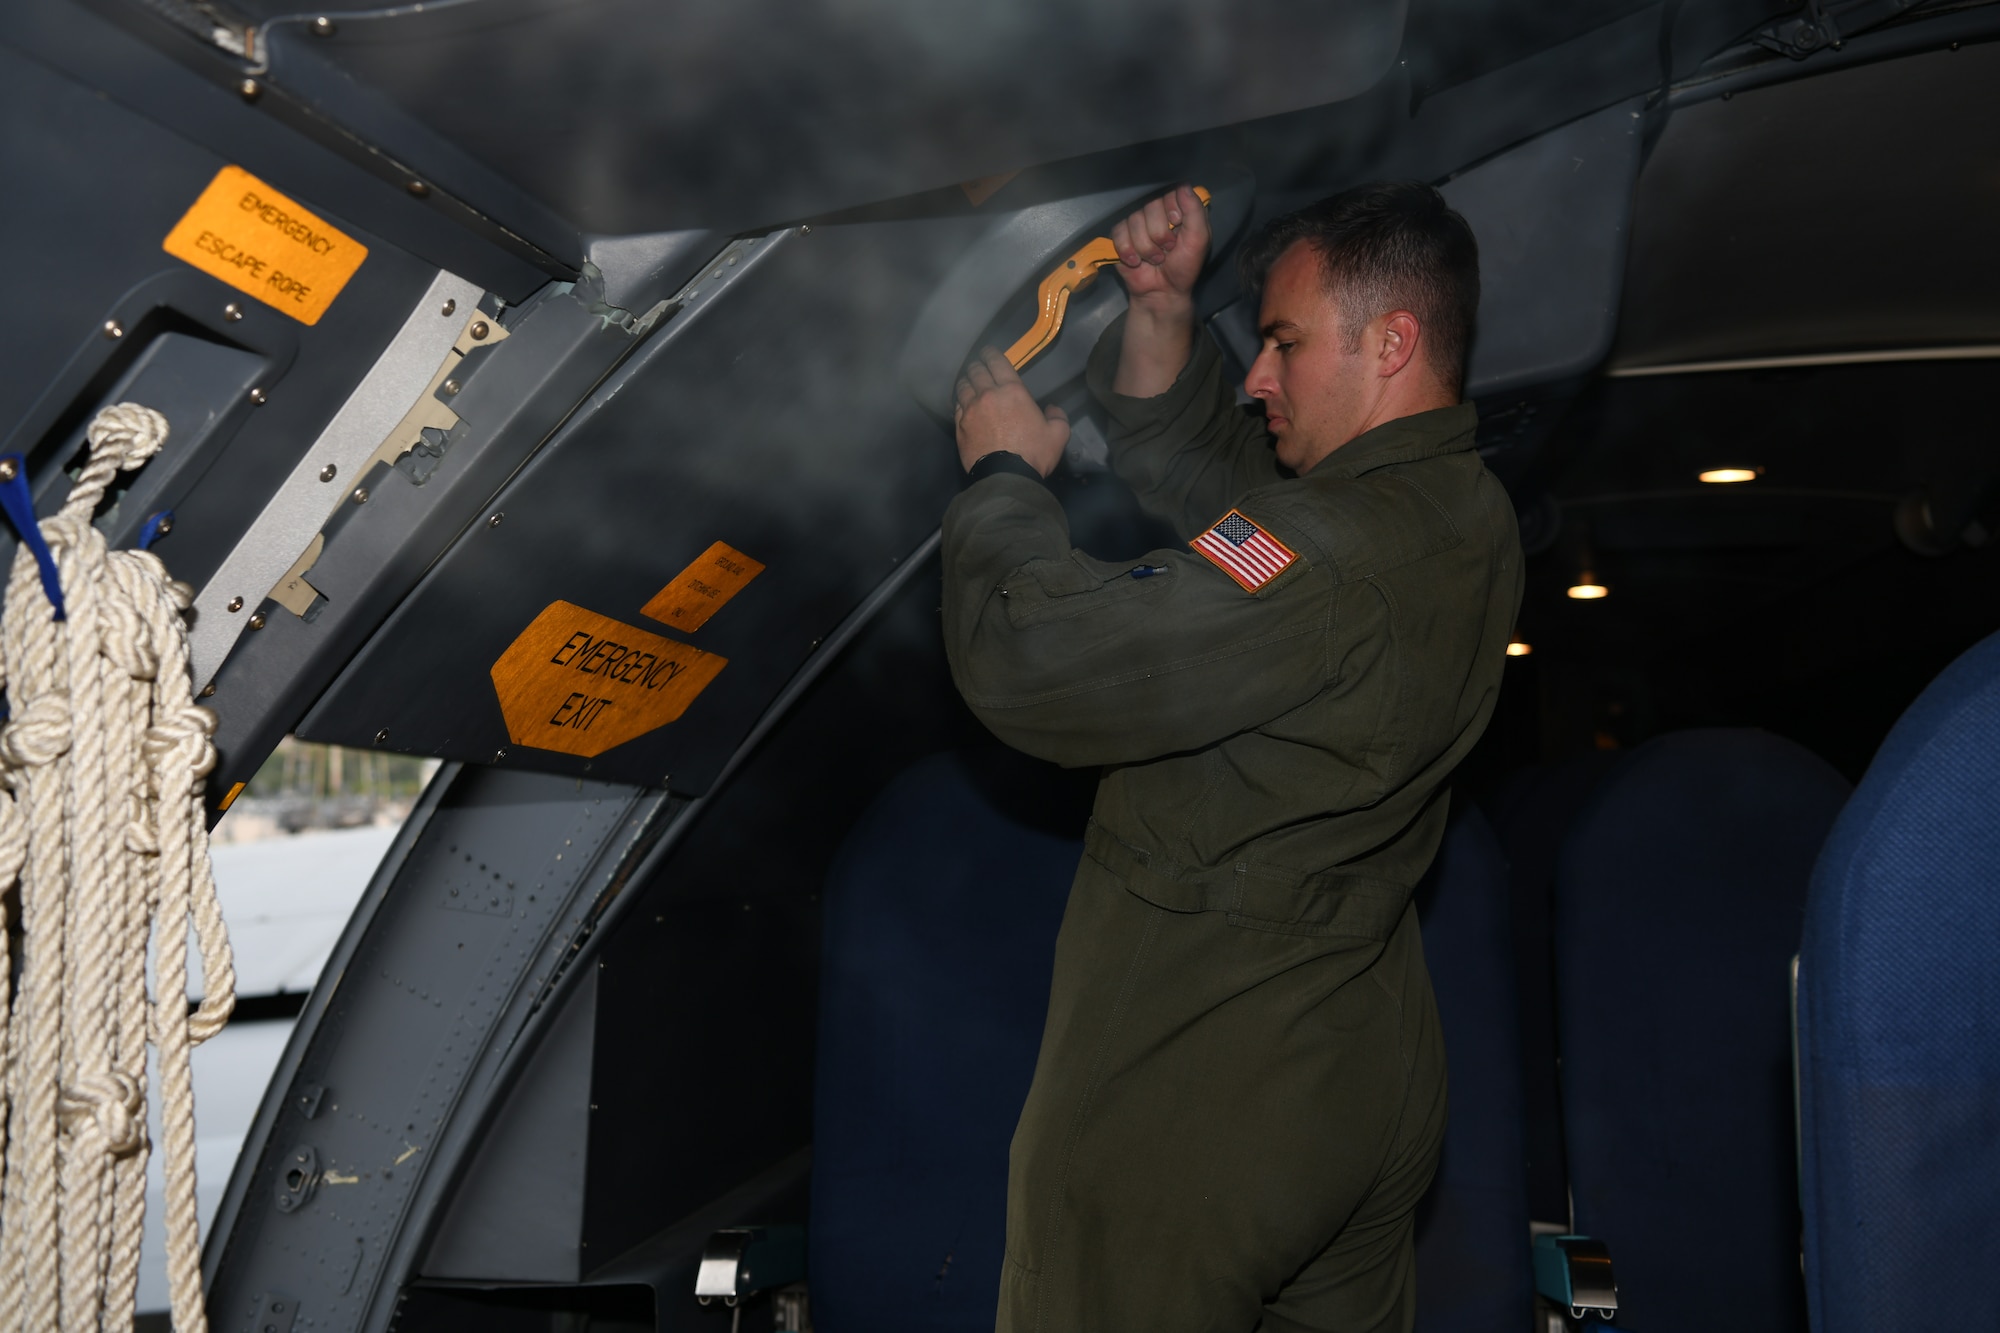 Staff Sgt. Stuart Martin, 68th Airlift Squadron loadmaster, closes a door in the troop compartment of a C-5M Super Galaxy aircraft Sept. 13, 2021, at Joint Base San Antonio-Lackland, Texas. Martin, who lost a leg in a motorcycle accident, was working to regain his loadmaster certifications and return to duty. (U.S. Air Force photo by Master Sgt. Kristian Carter)